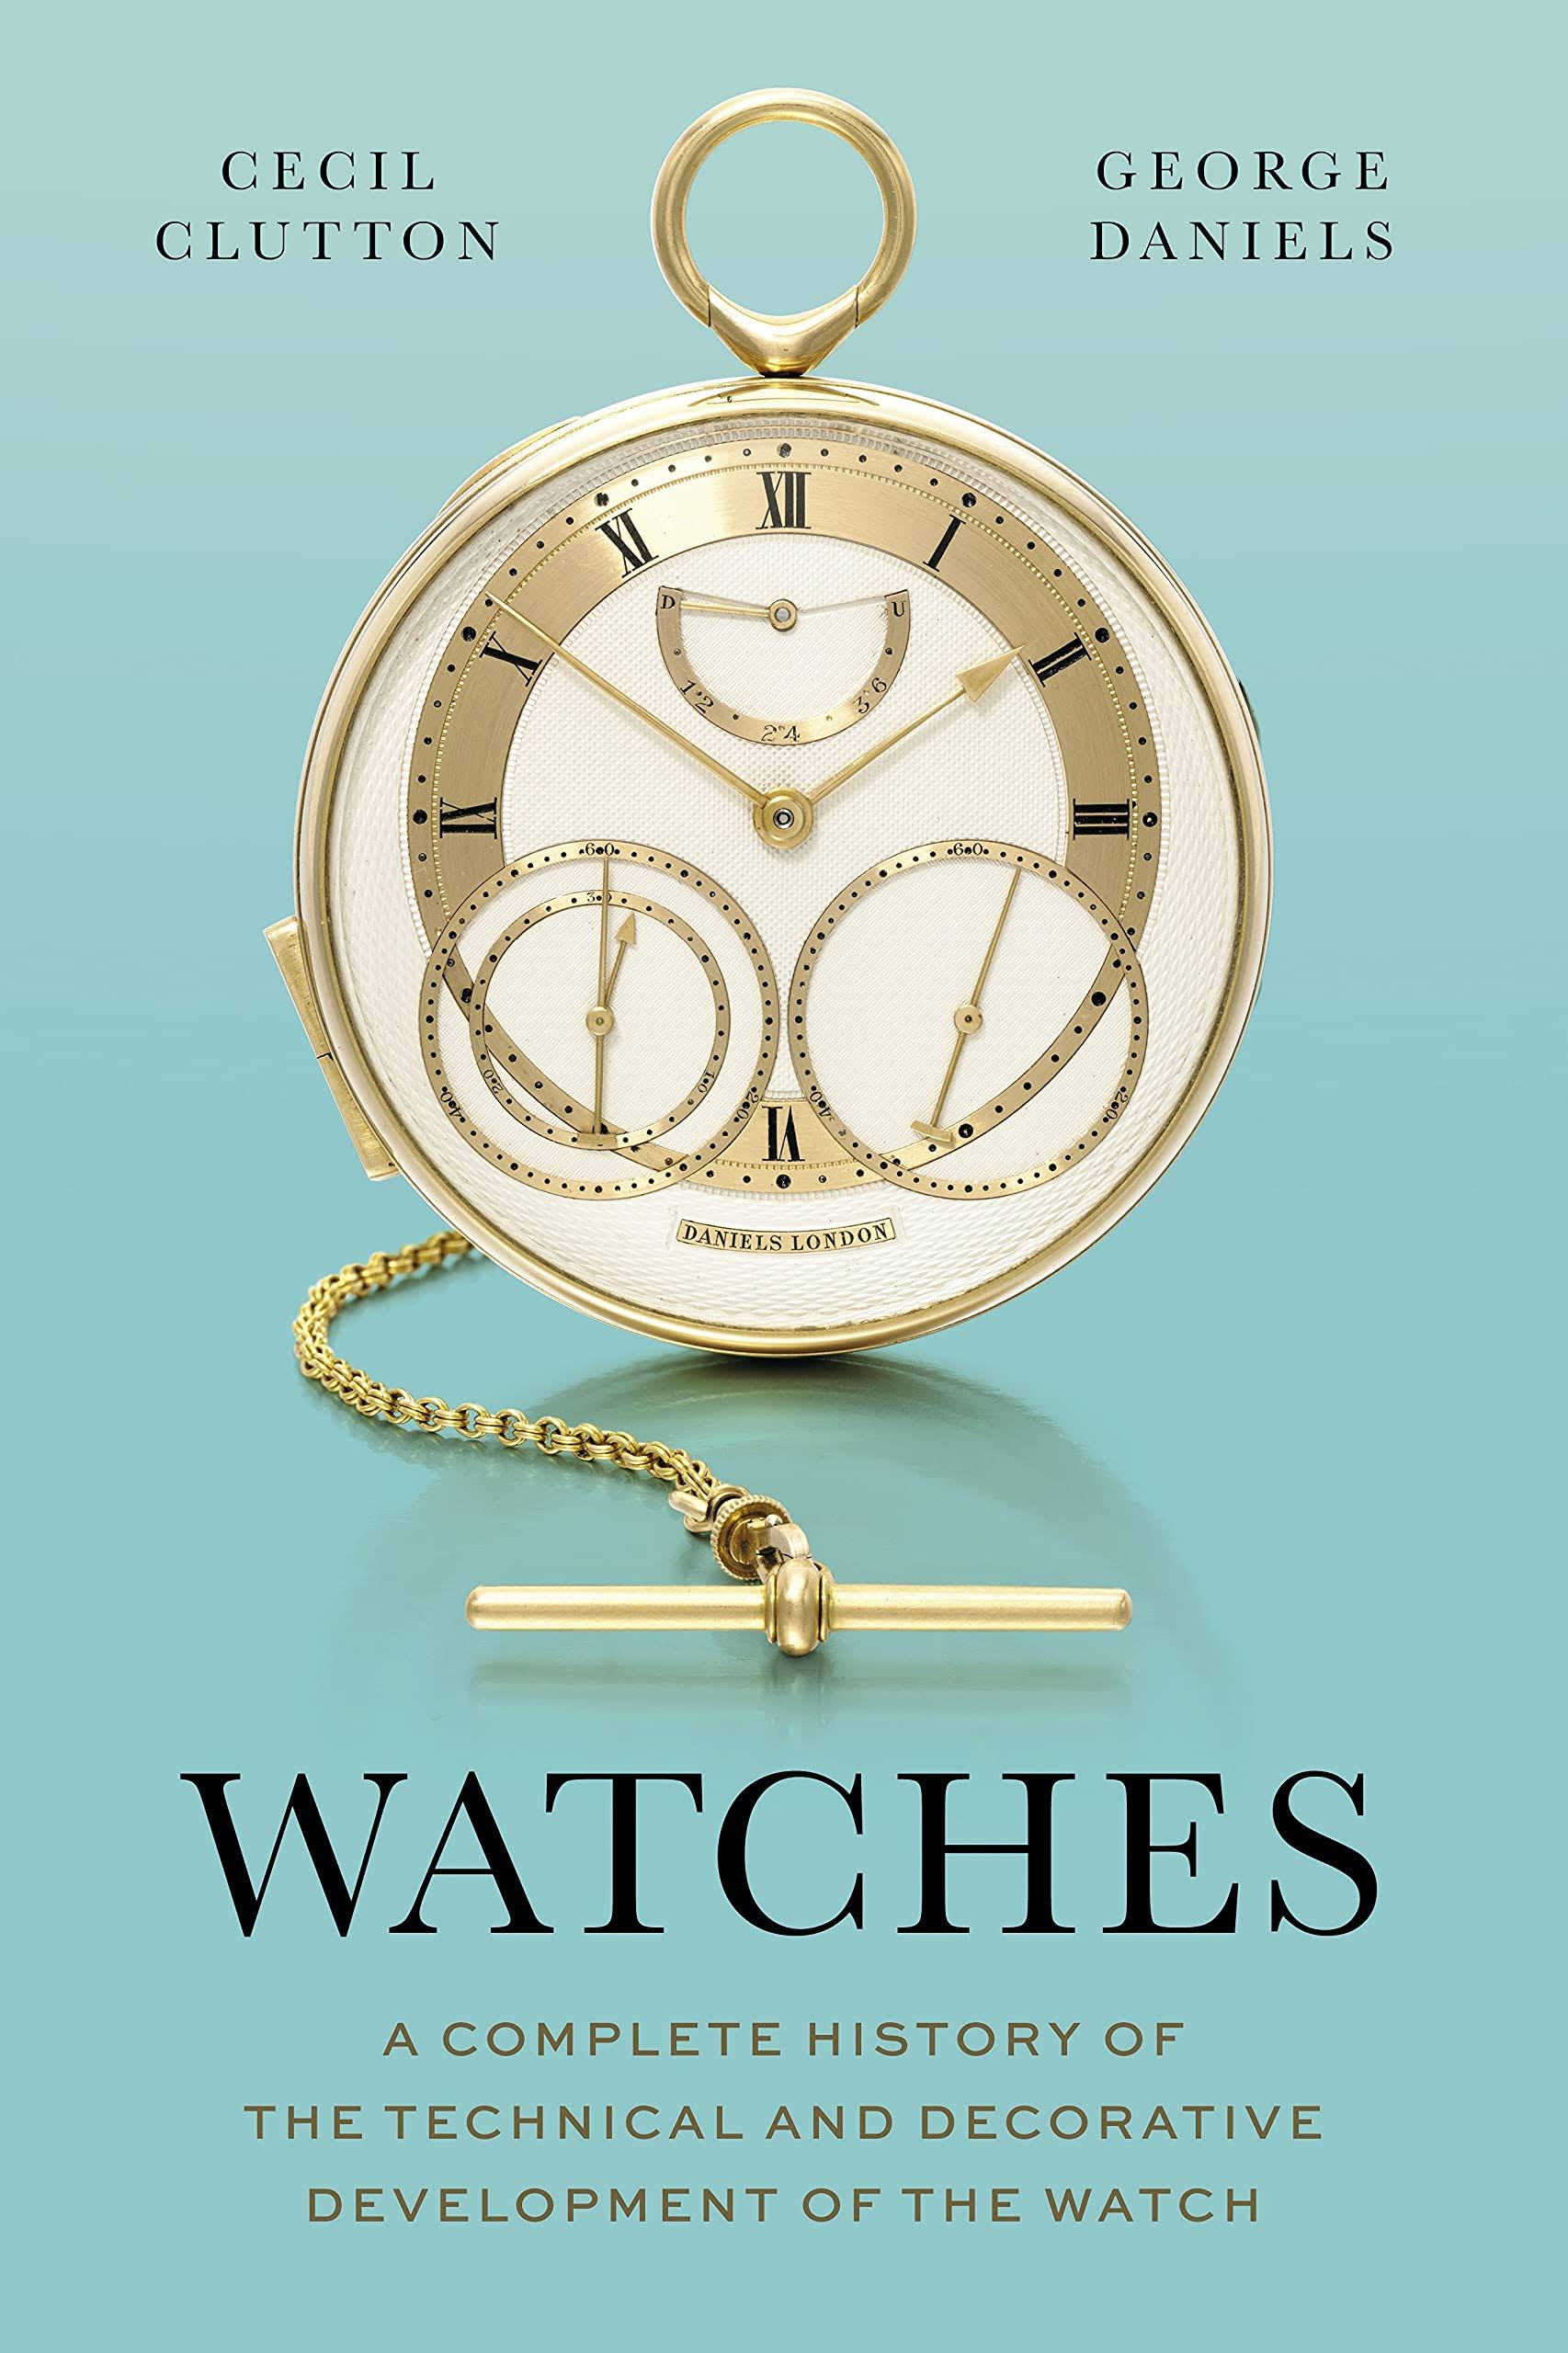 Watches by George Daniels